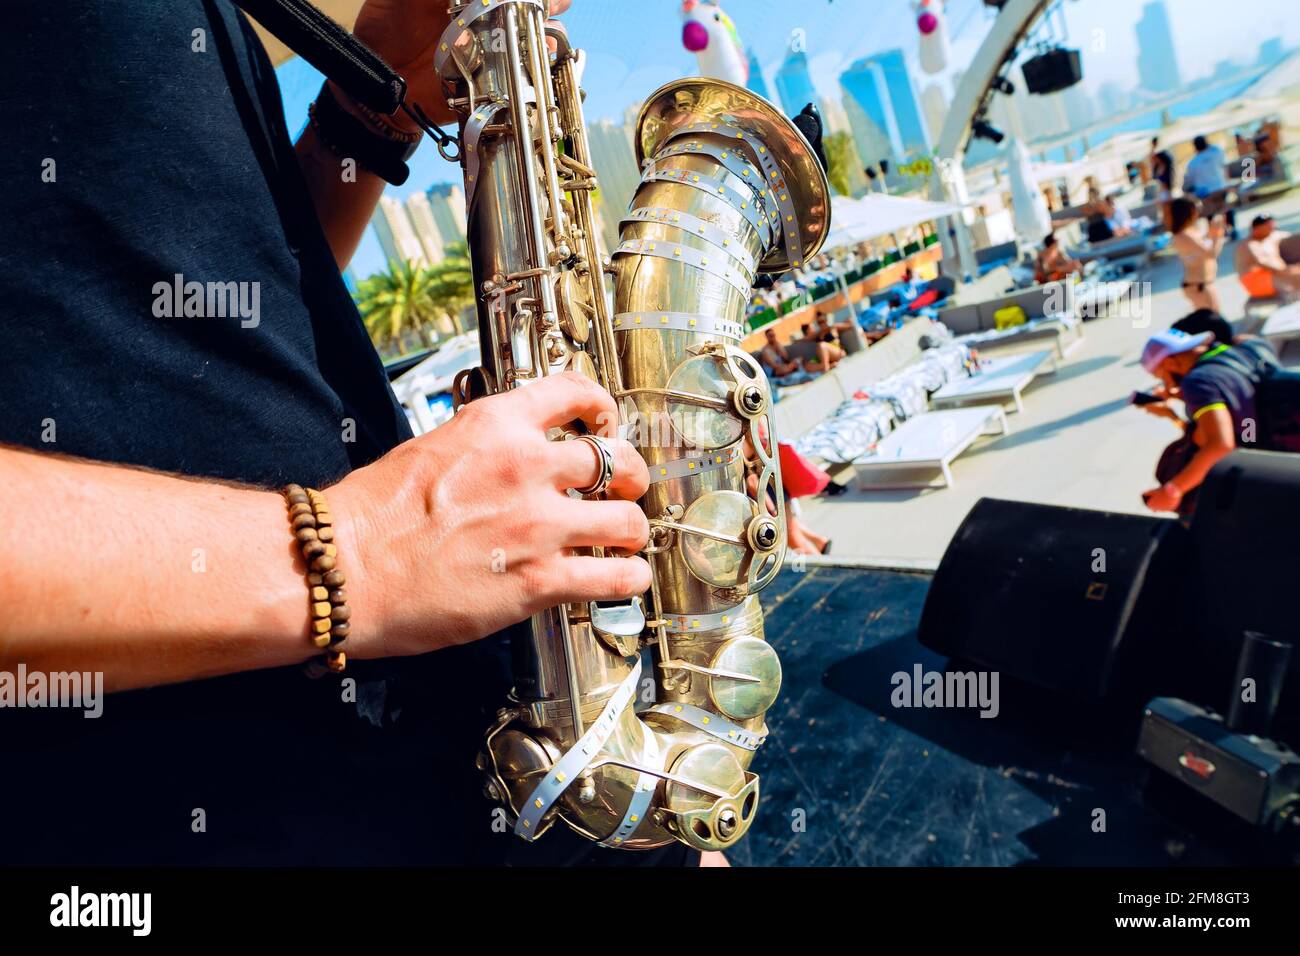 Man playing saxophone outdoors at brunch Stock Photo